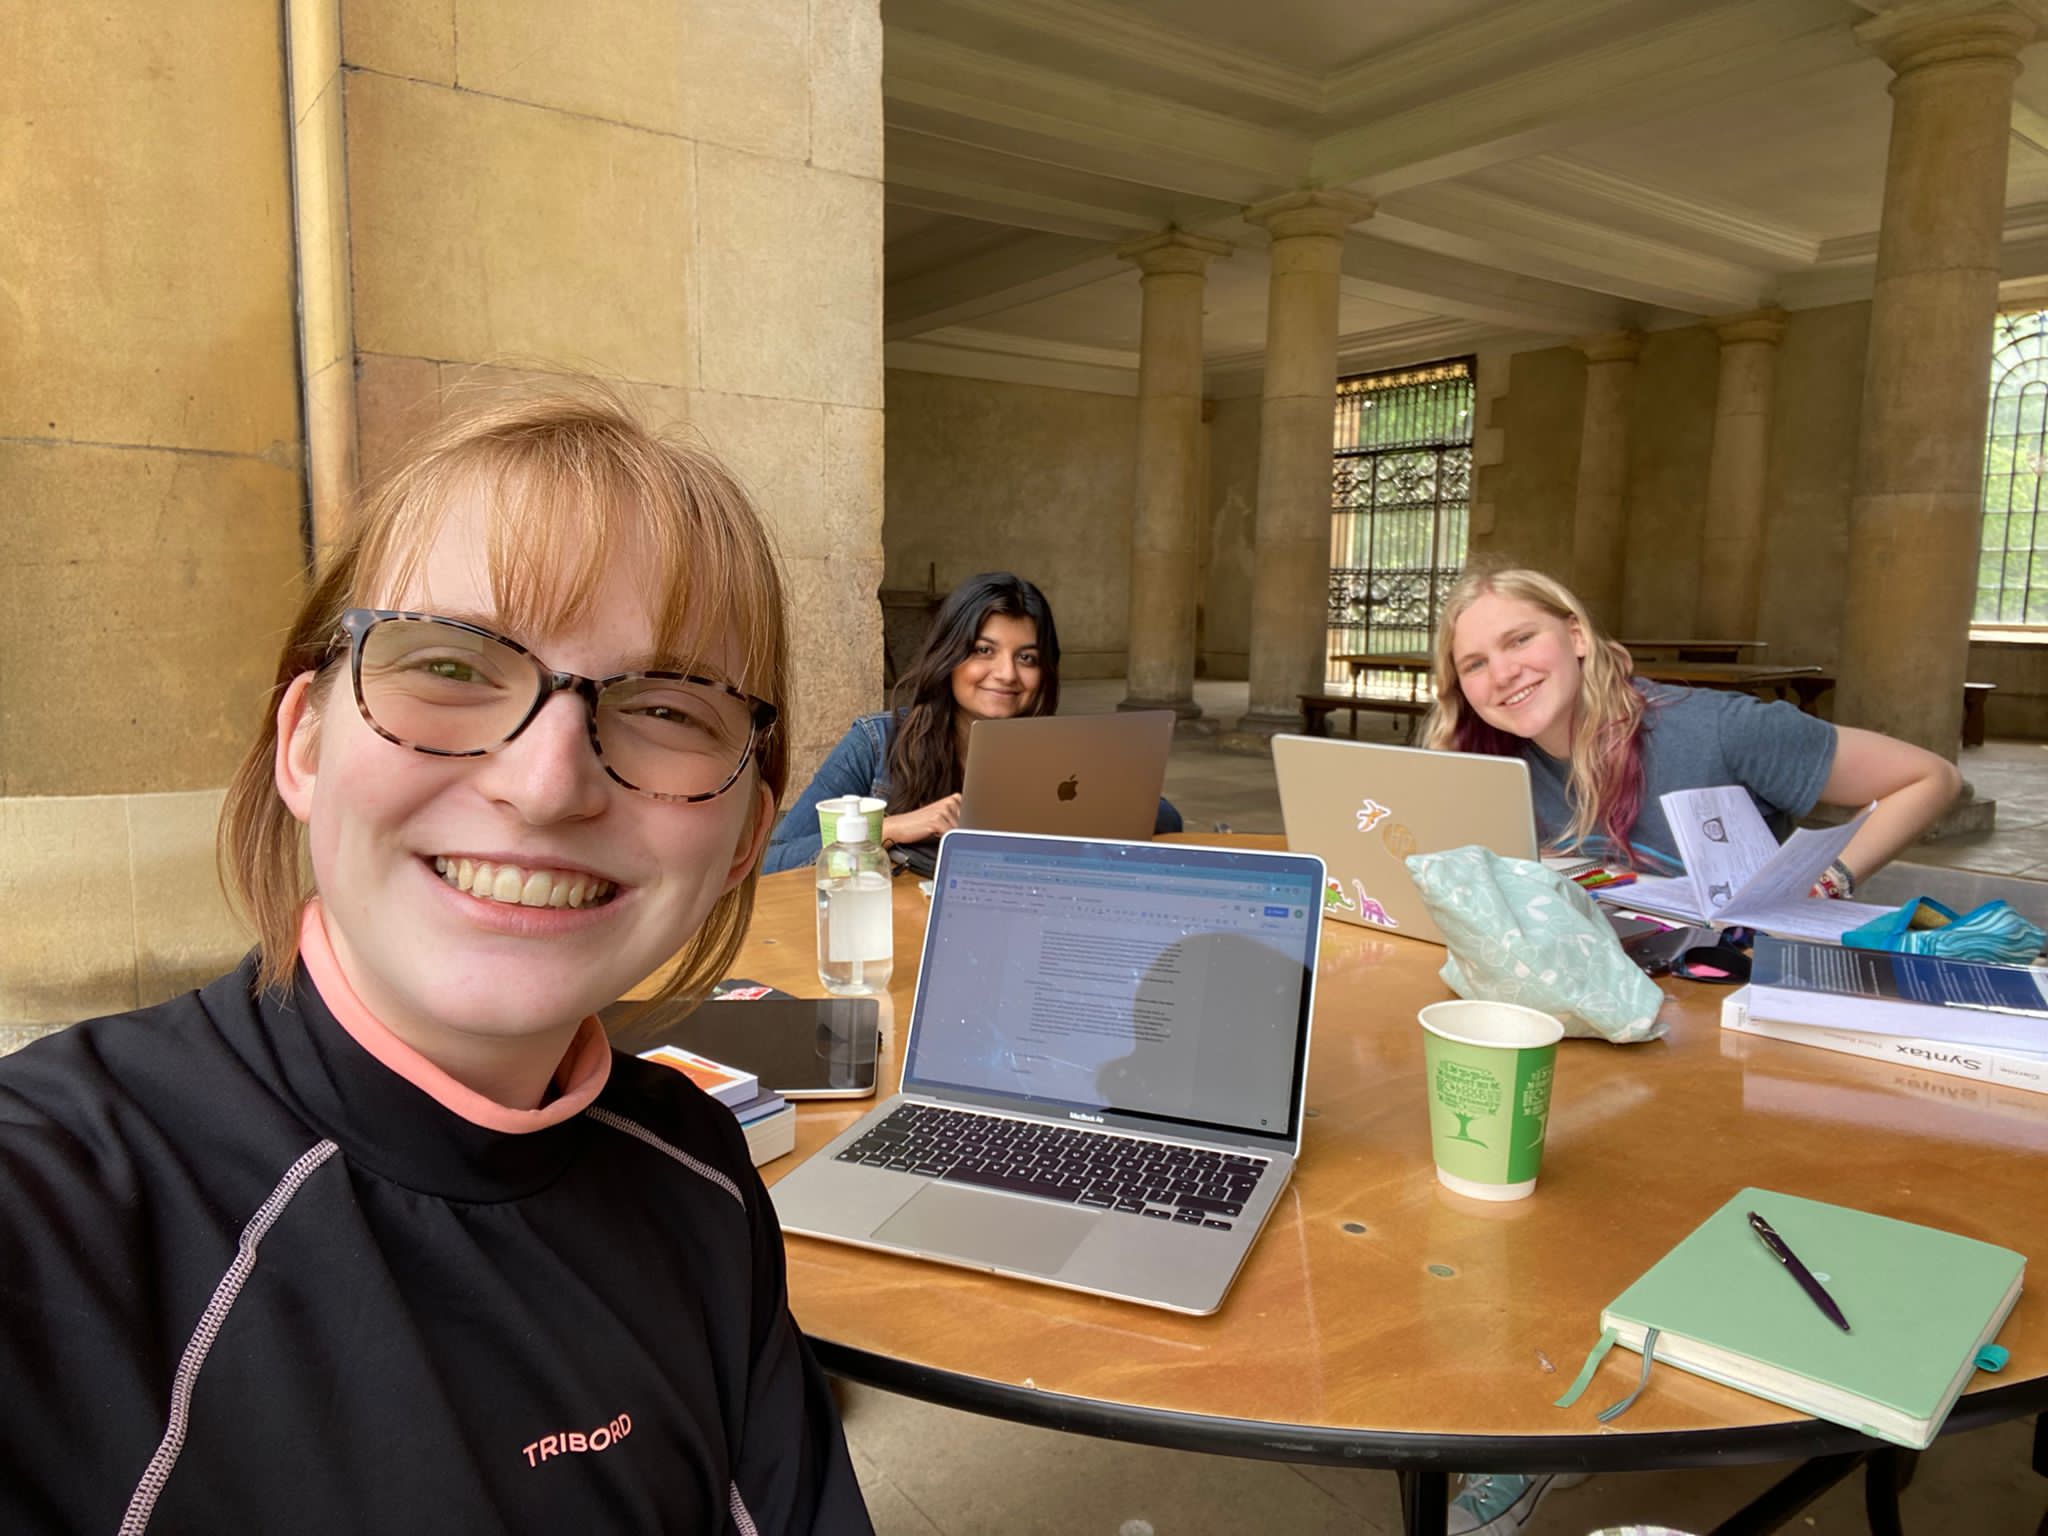 A selfie with three students at a desk, outdoors